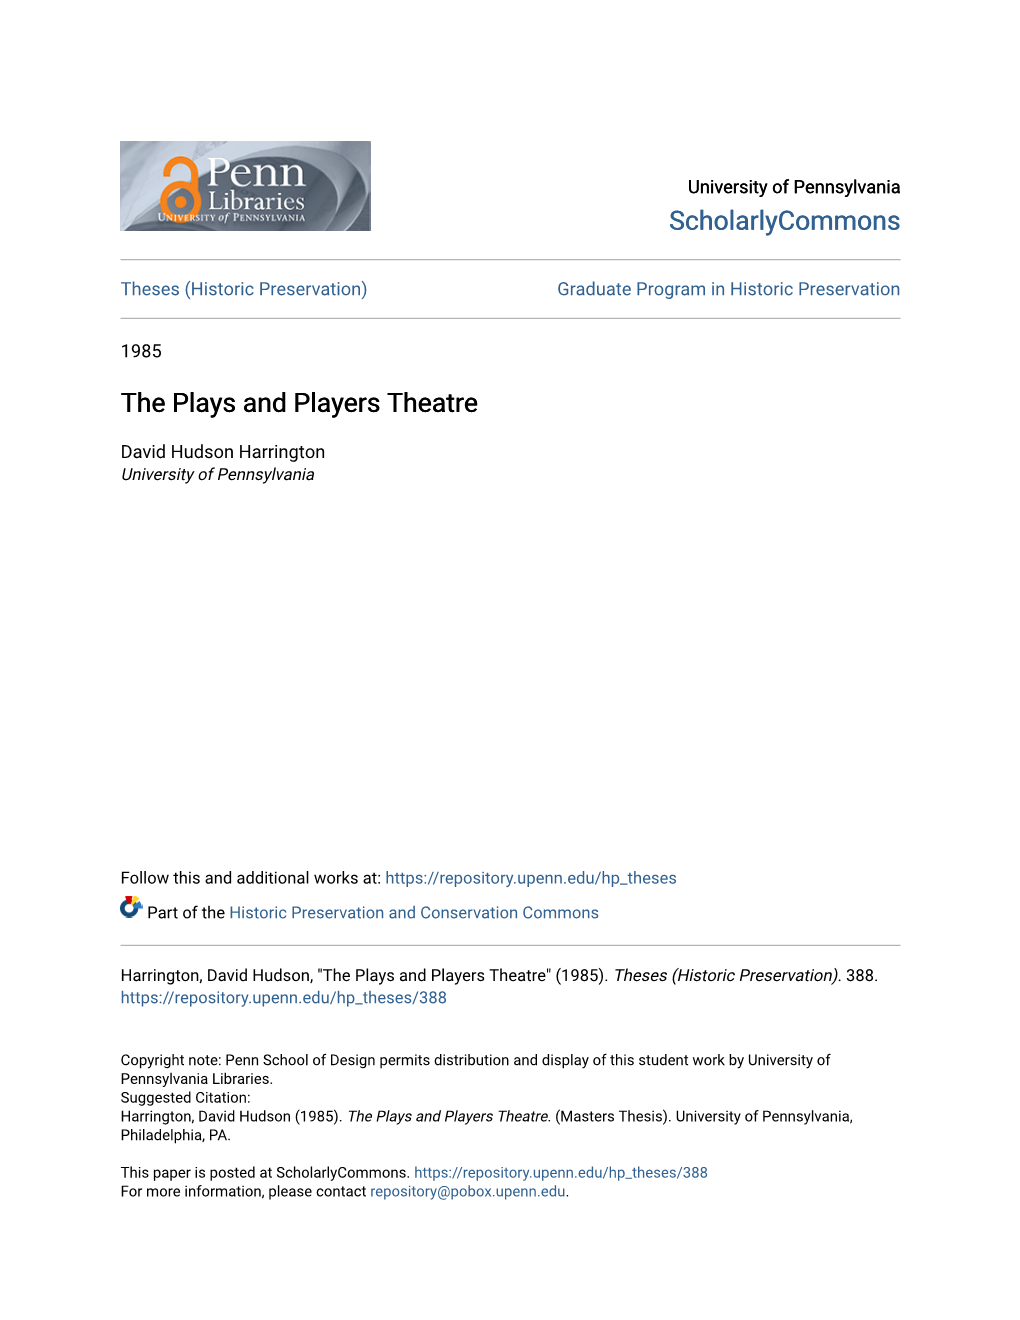 The Plays and Players Theatre